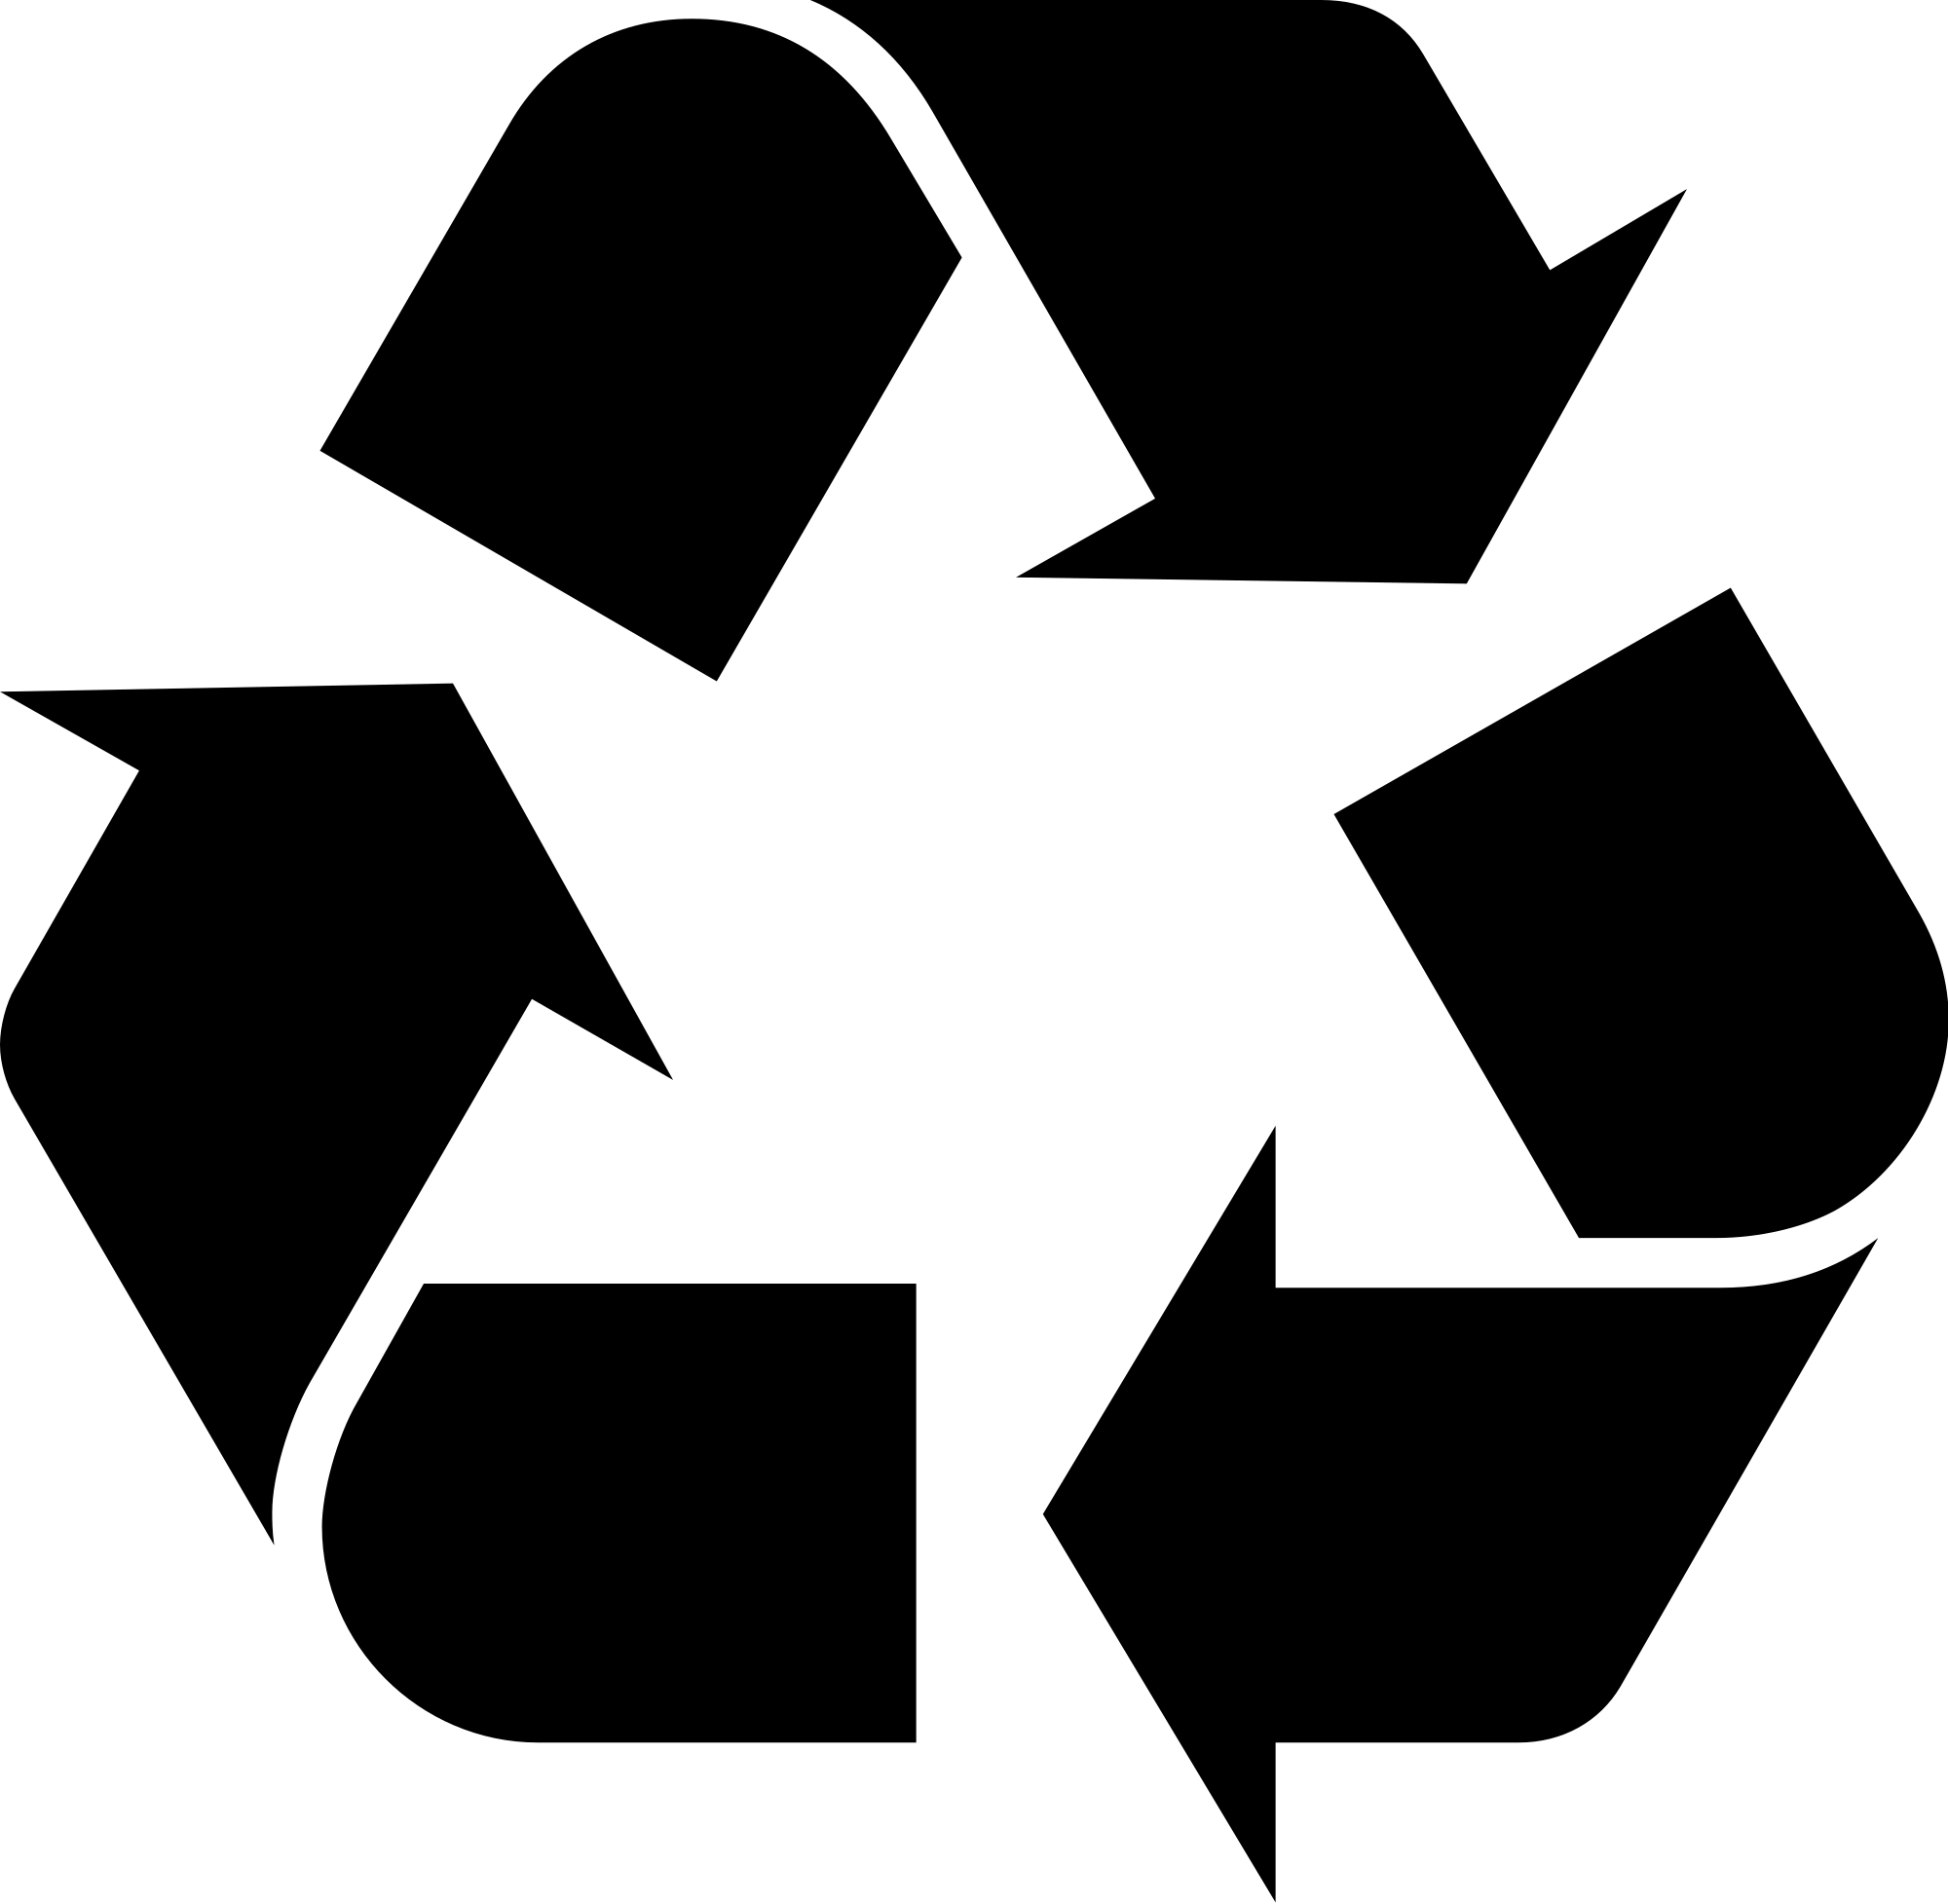 Recycling Logo - File:Recycling symbol.svg - Wikimedia Commons